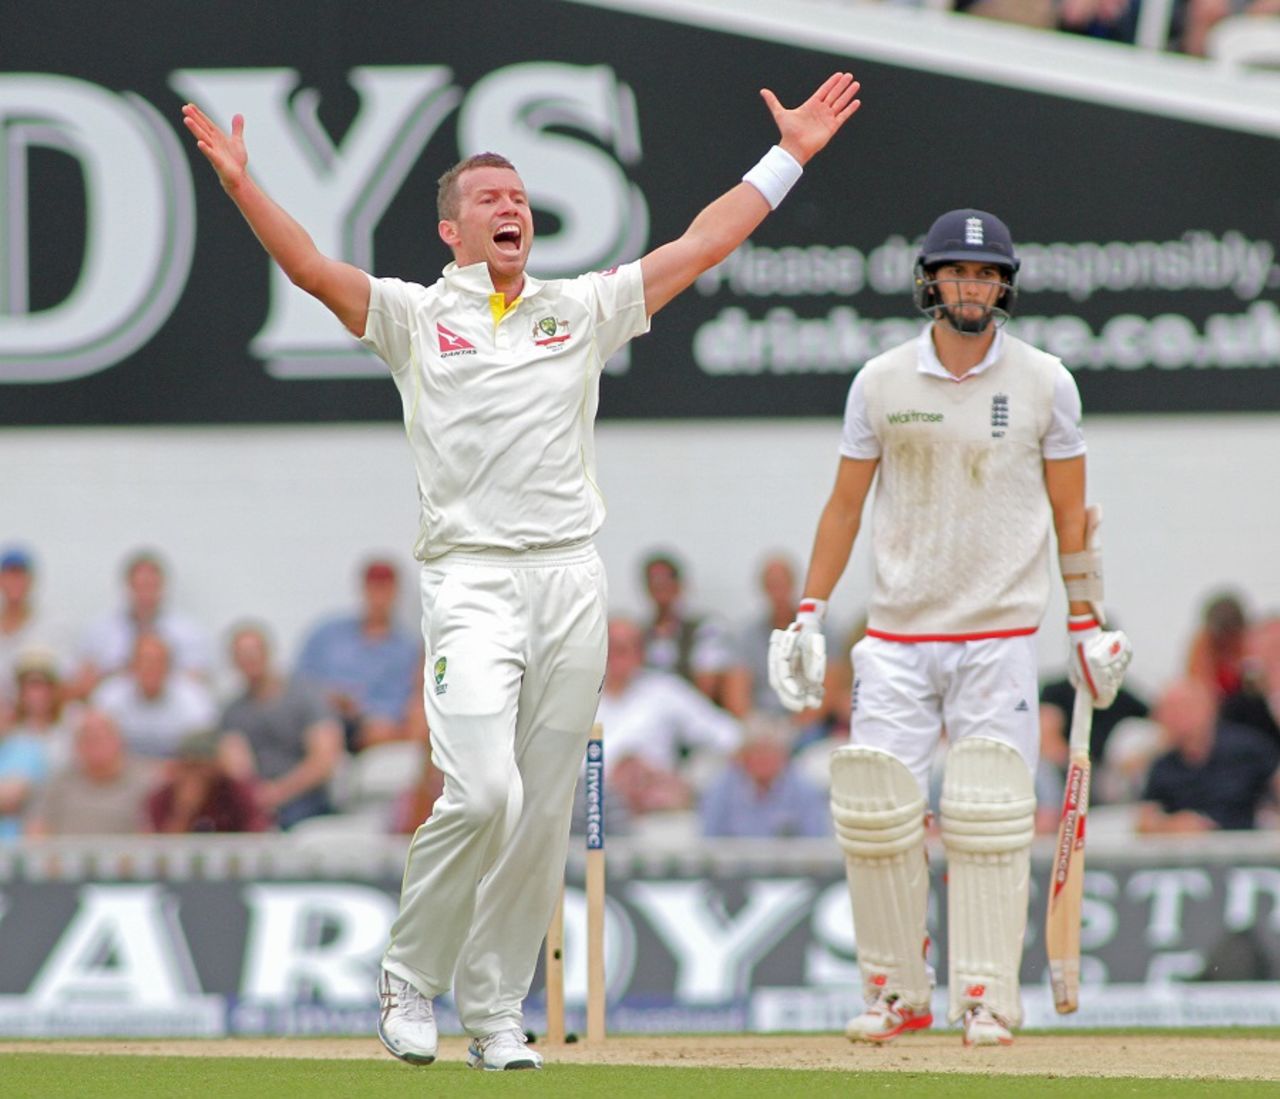 Peter Siddle had Mark Wood lbw for 6,  England v Australia, 5th Investec Ashes Test, The Oval, 4th day, August 23, 2015